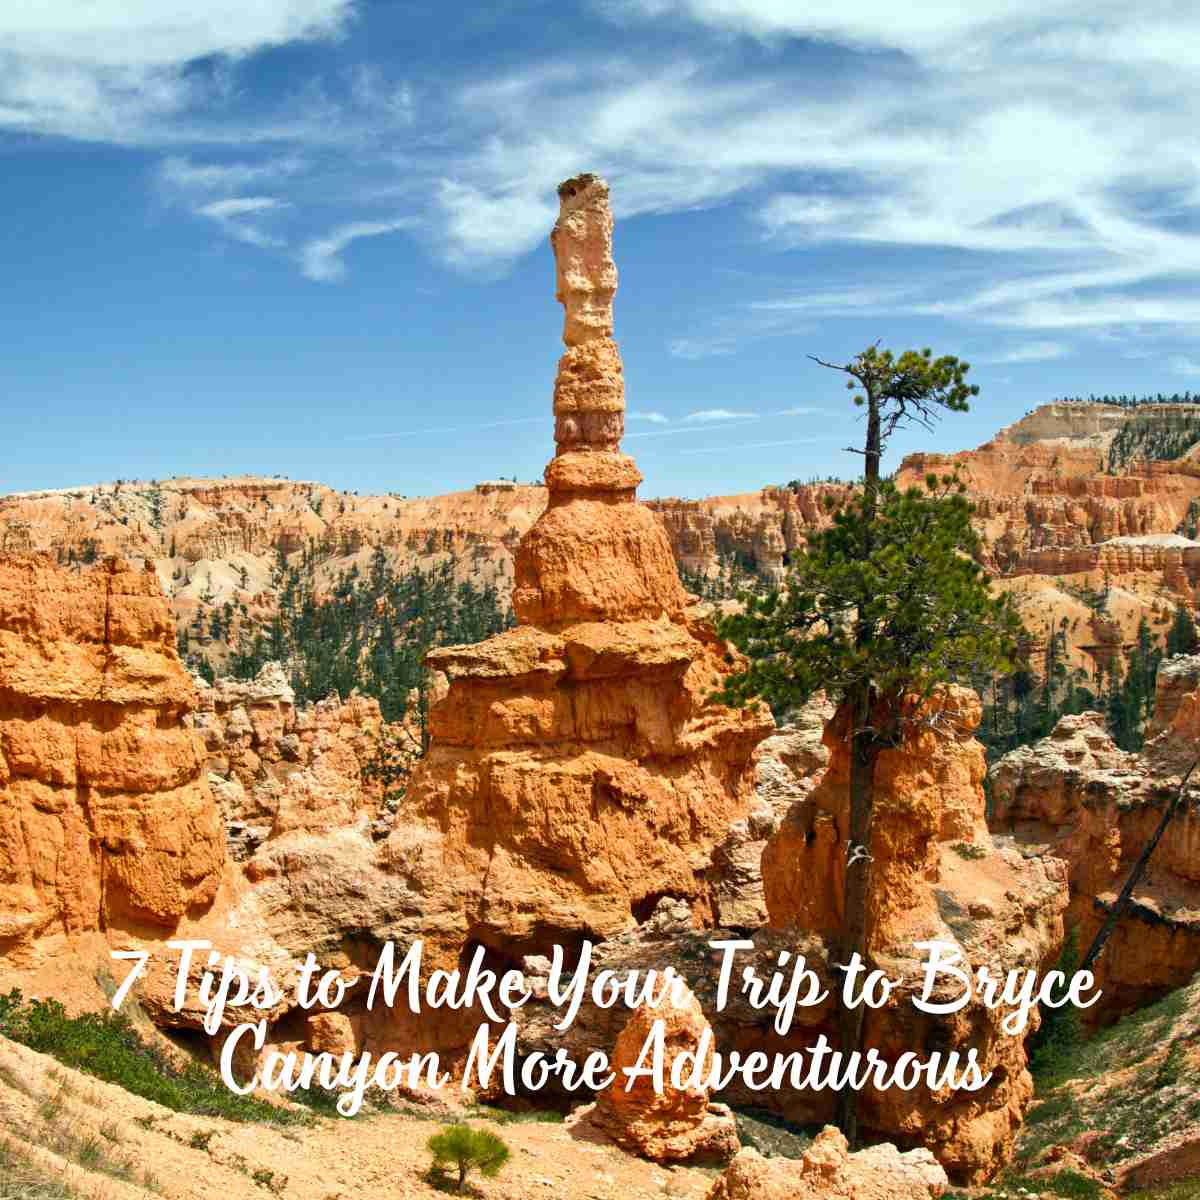 Trip to Bryce Canyon More Adventurous